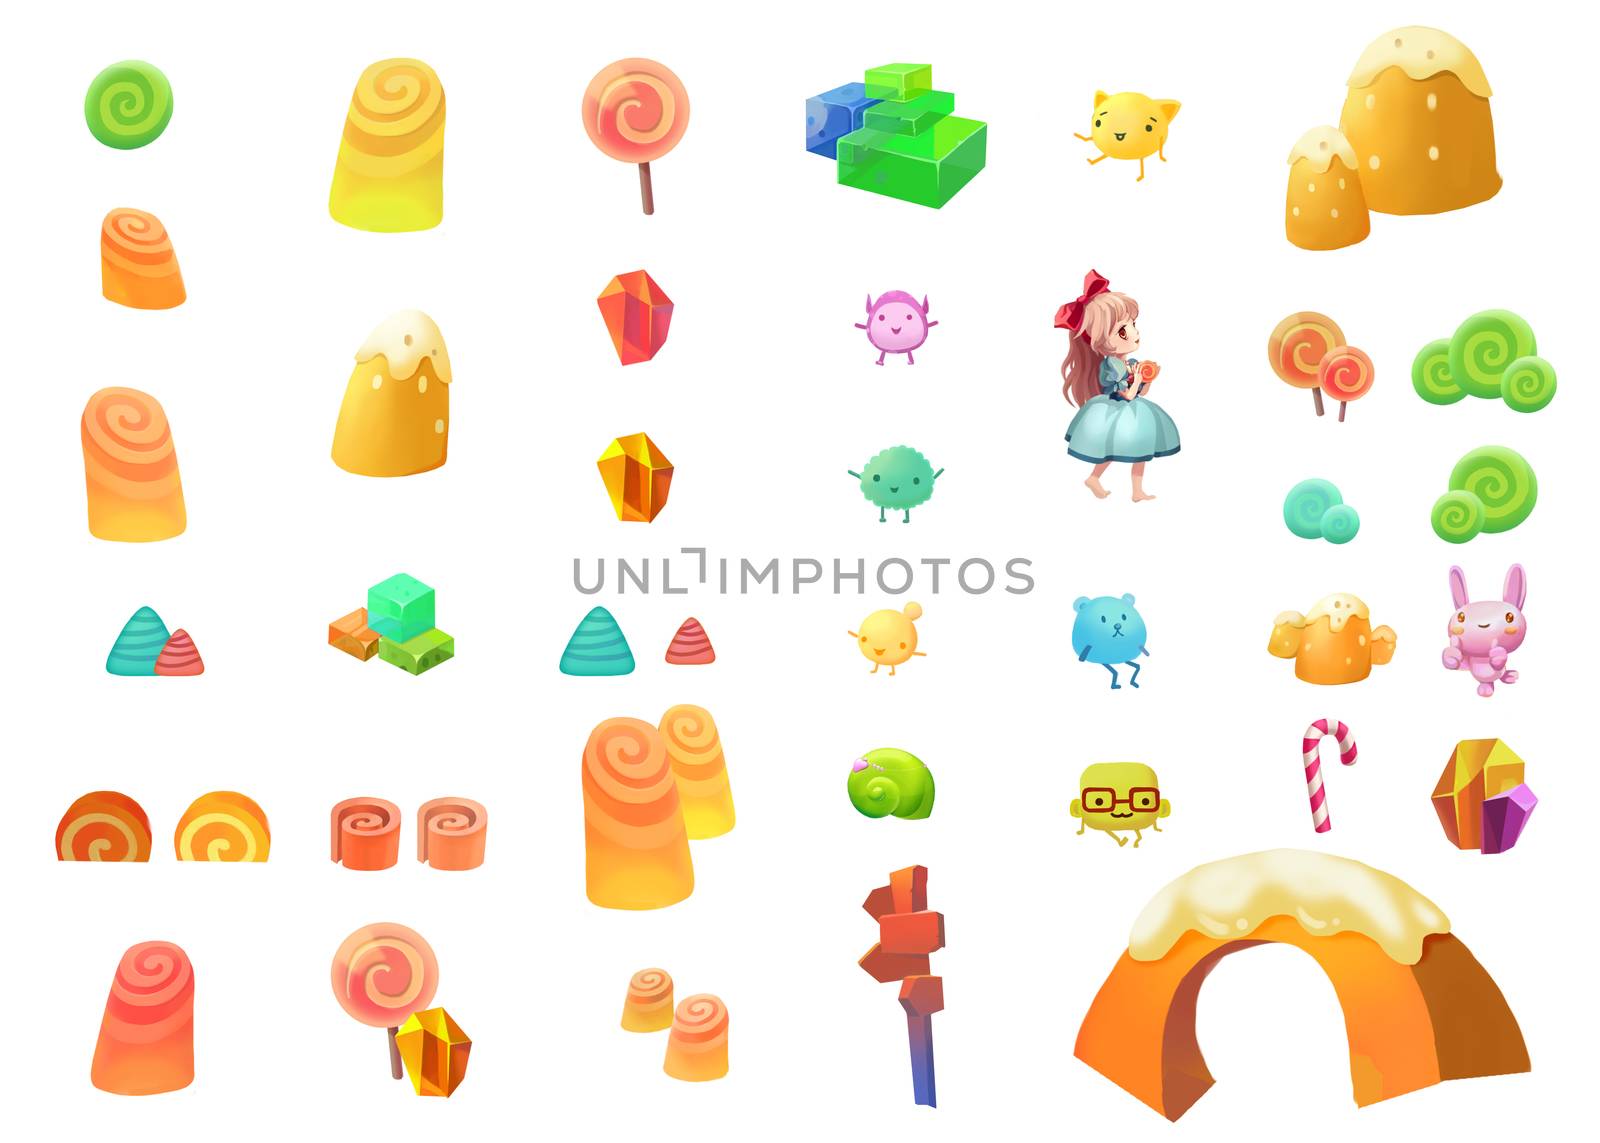 Illustrative Elements of Candy Land with White Background. Fantastic Style.